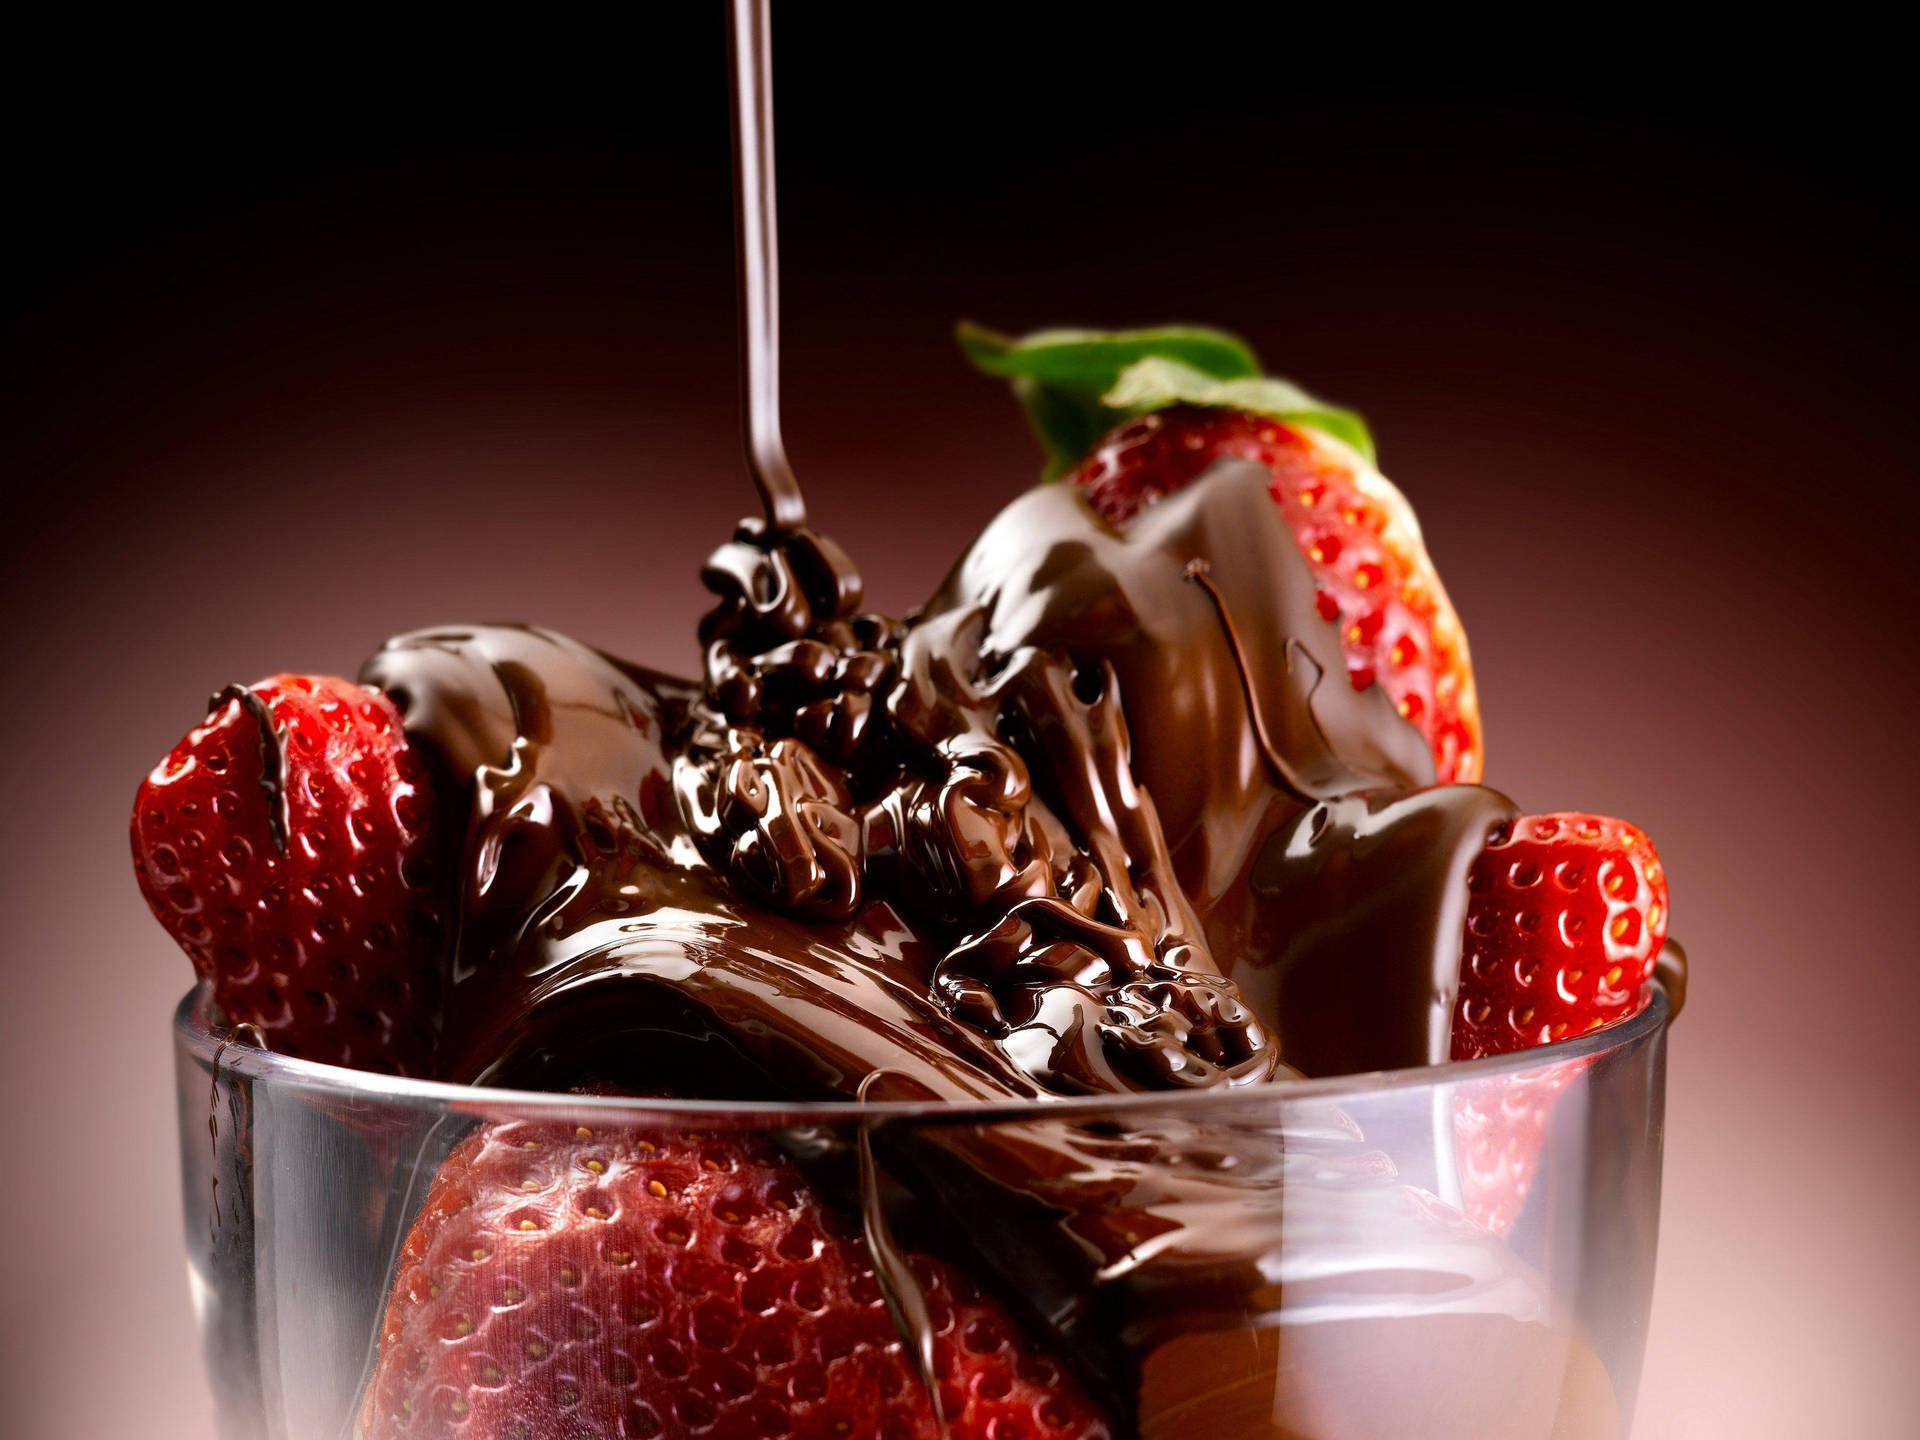 Chocolate-covered Strawberry Desserts Wallpaper